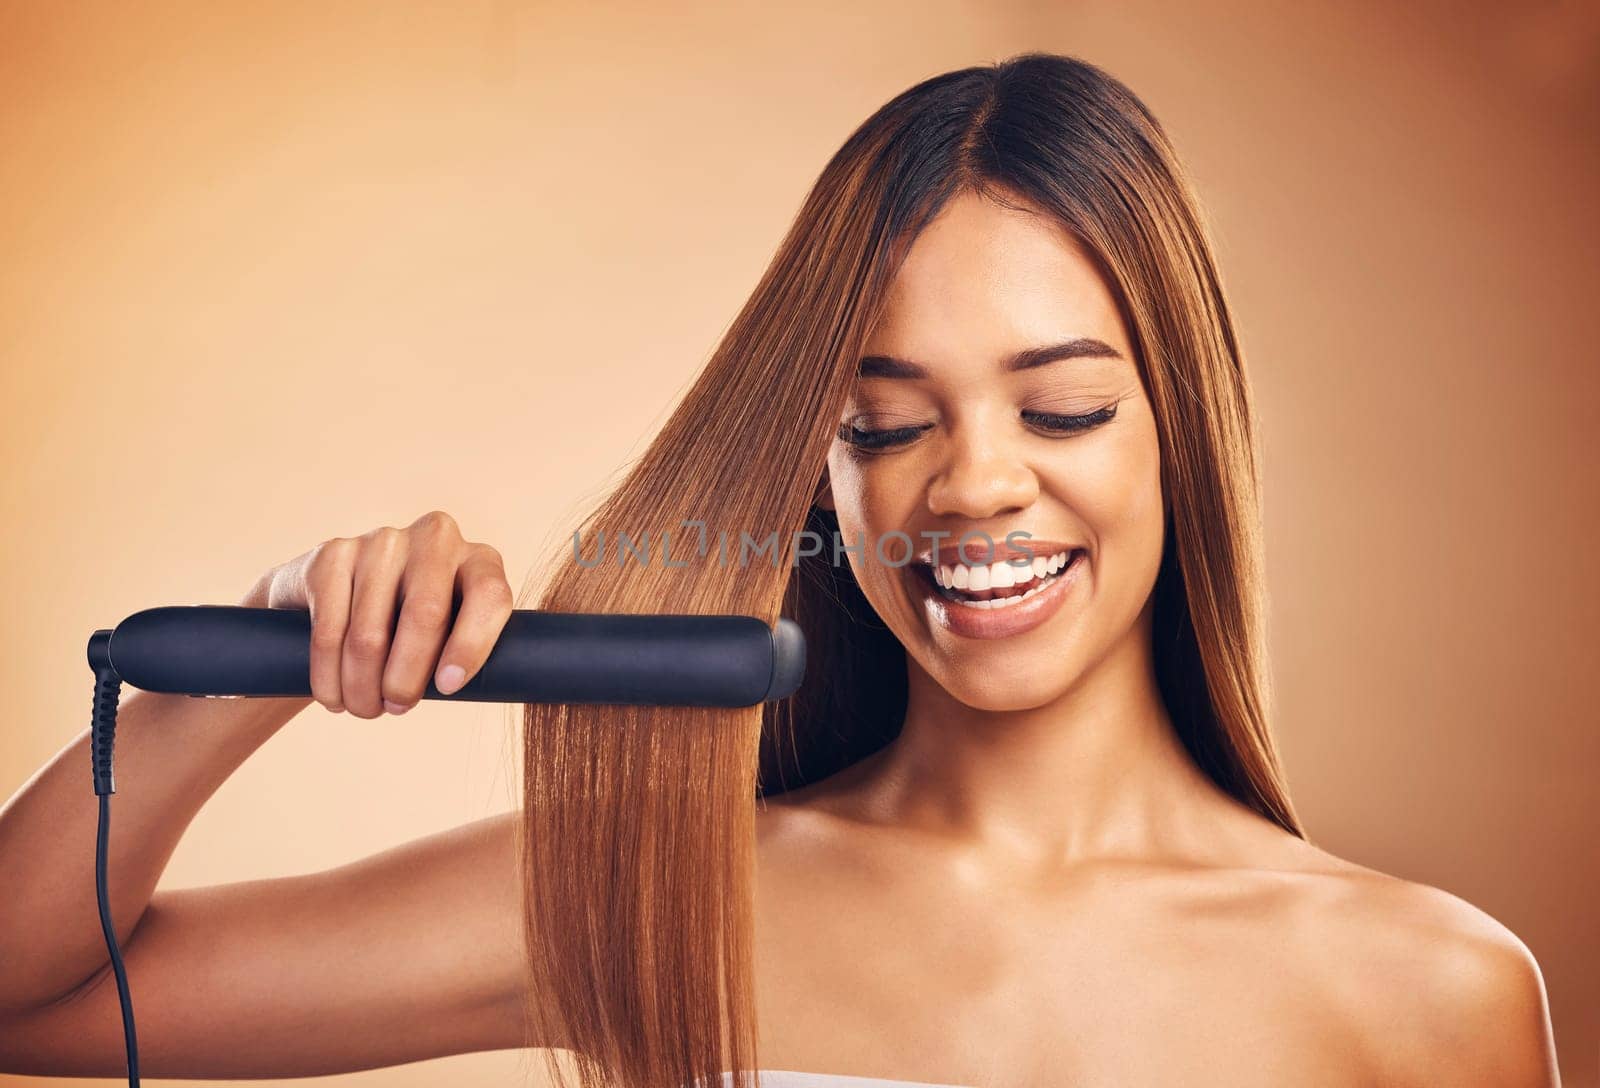 Woman, hair and beauty, flat iron and smile, haircare and keratin treatment isolated on studio background. Female model with highlights, electric straightener and heat, happy with growth and texture.